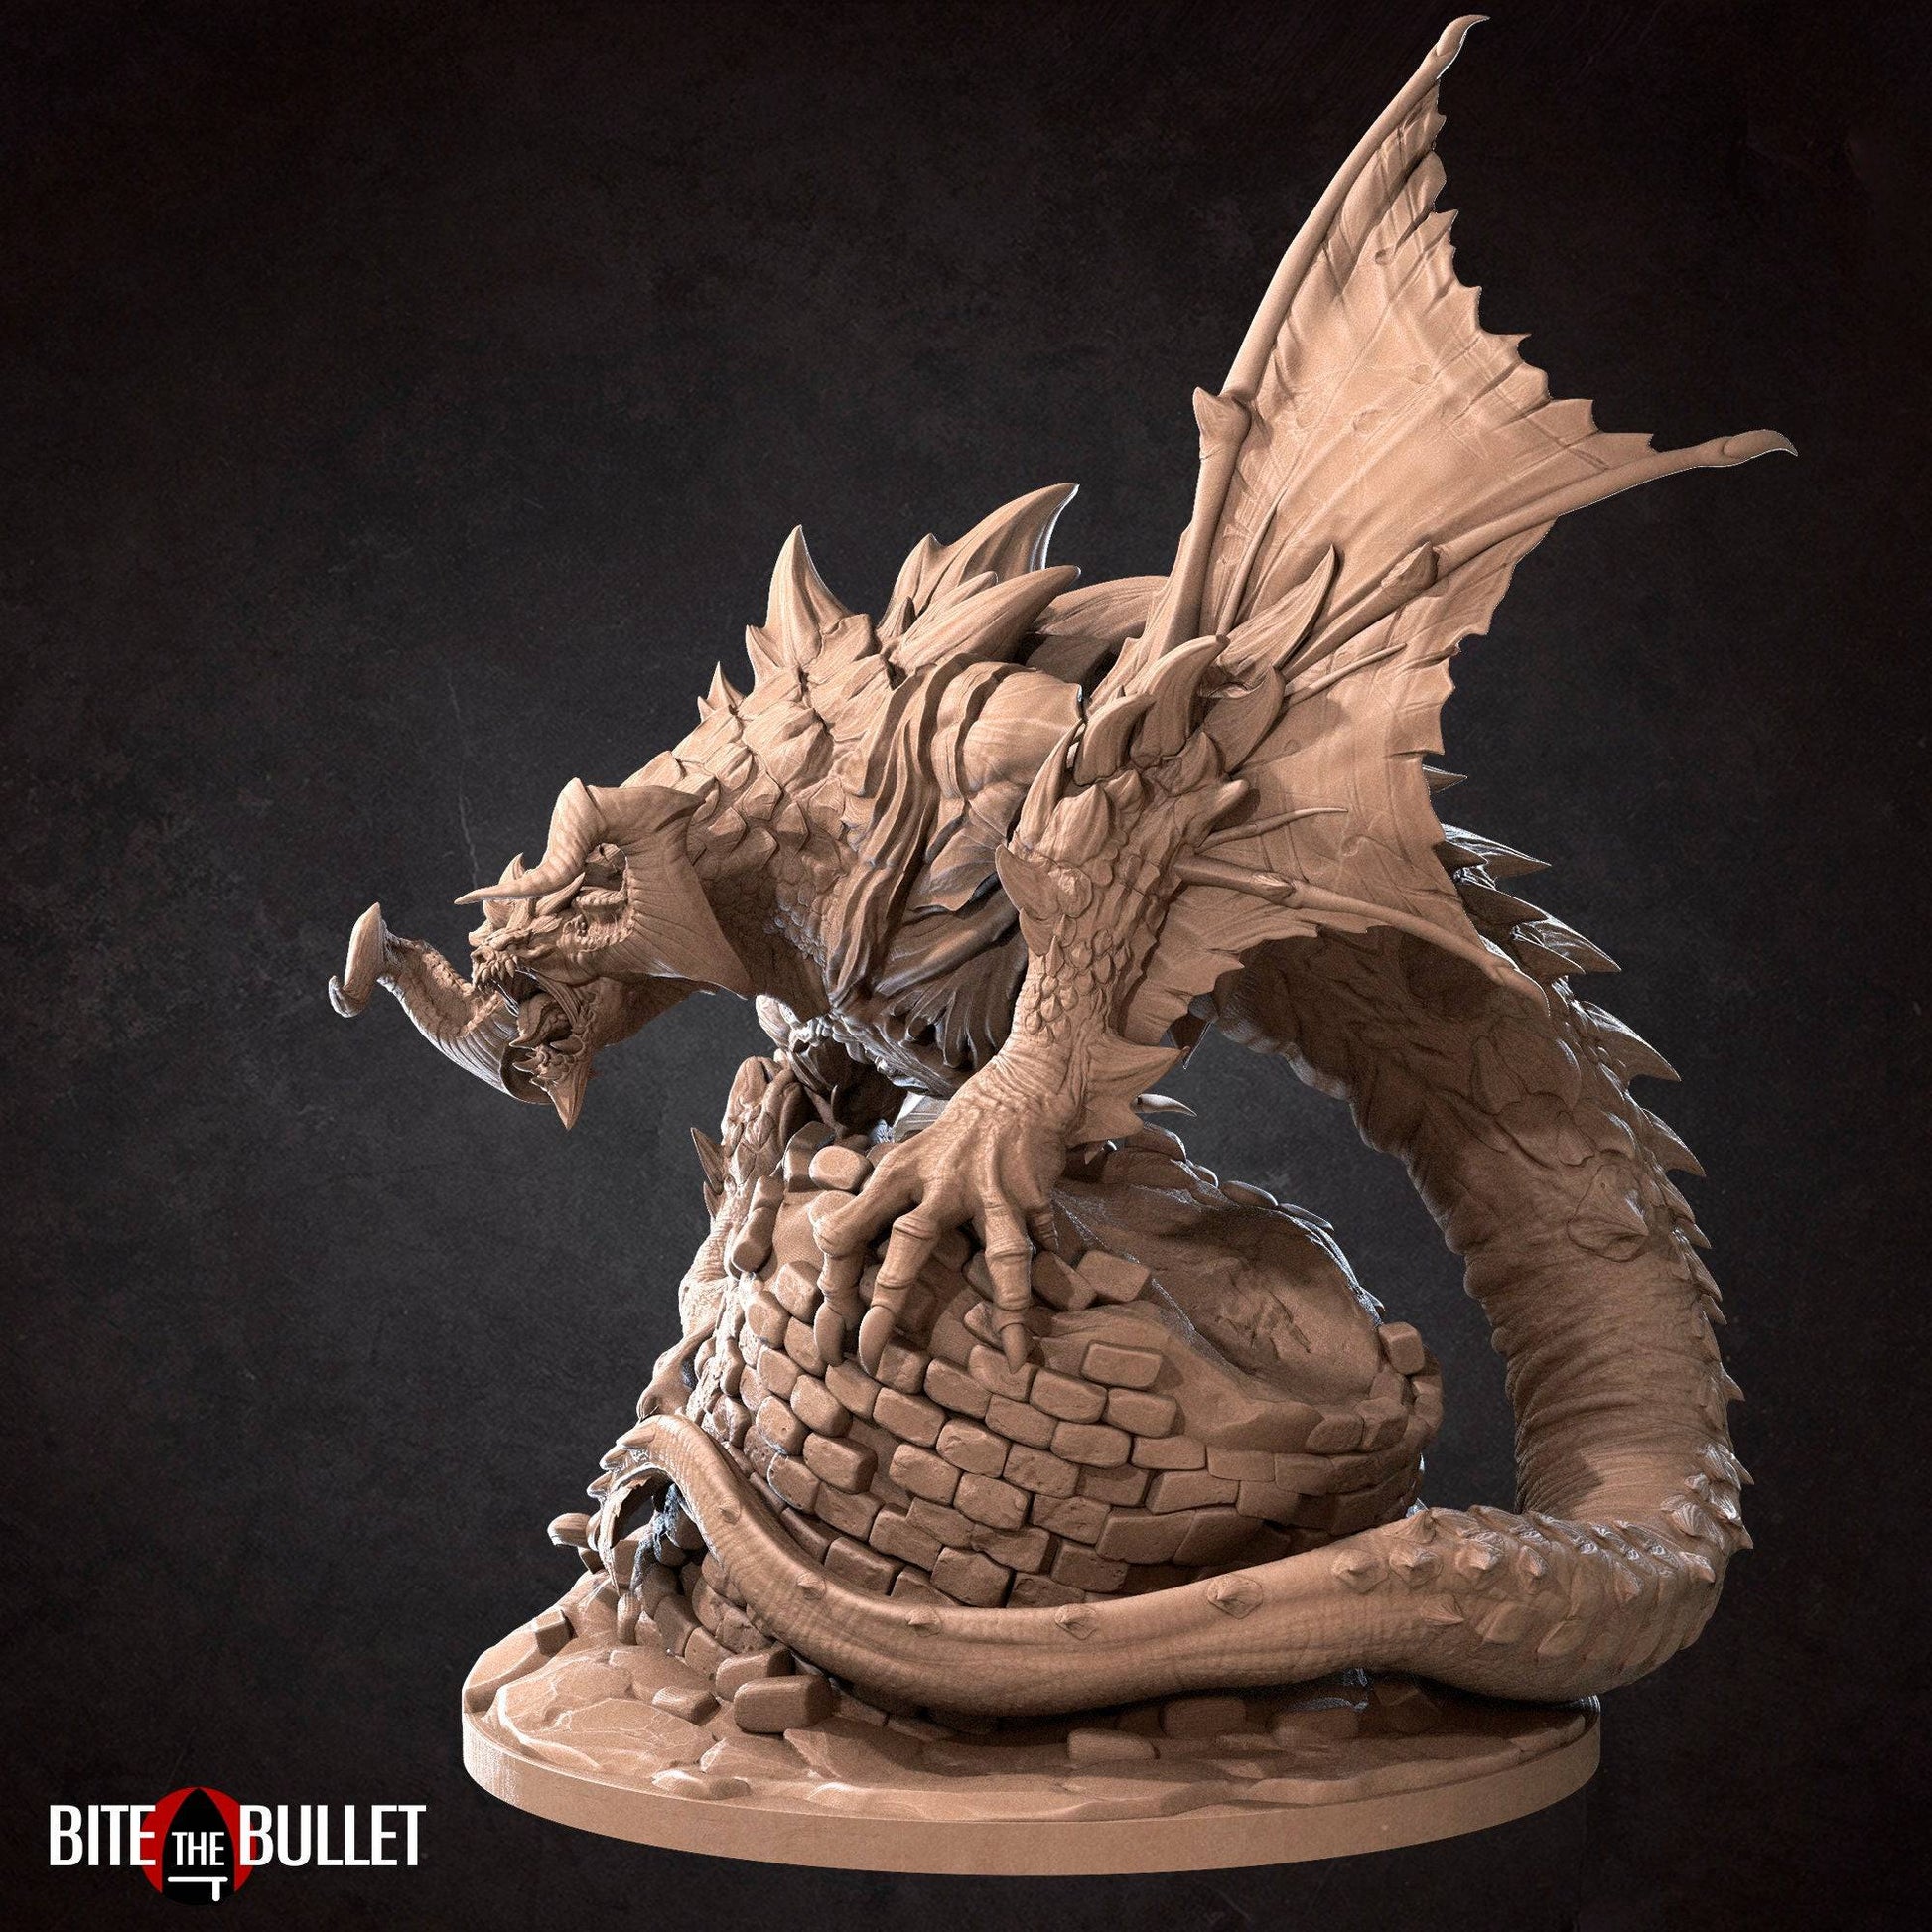 Nightfall the Corrupted Wyvern | D&D Miniature TTRPG Character | Bite the Bullet - Tattles Told 3D